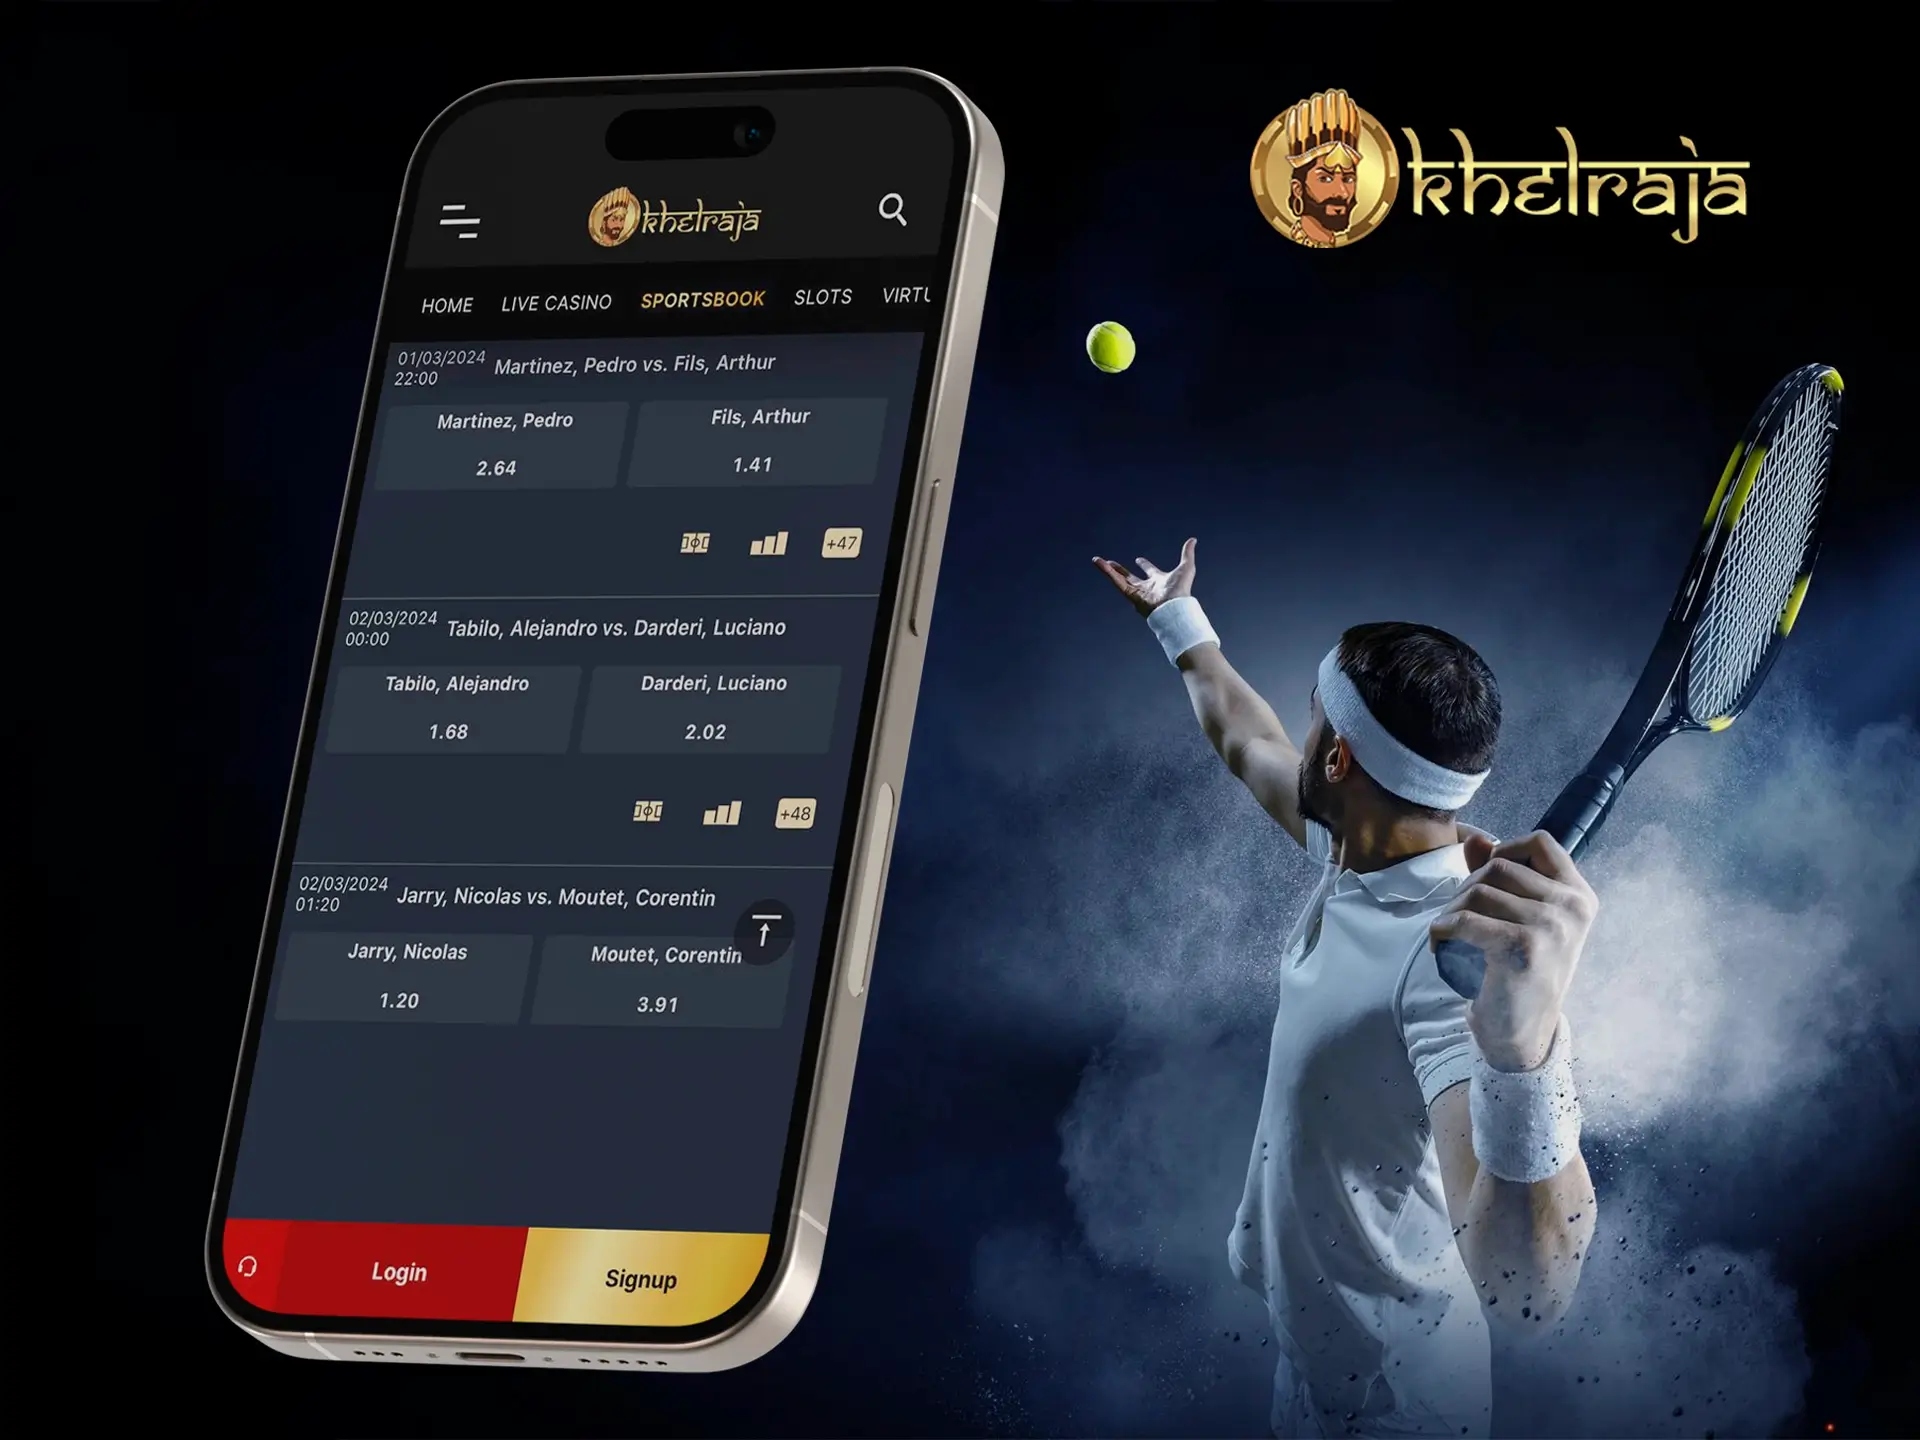 Use the Khelraja app to instantly access and search for great tennis odds.